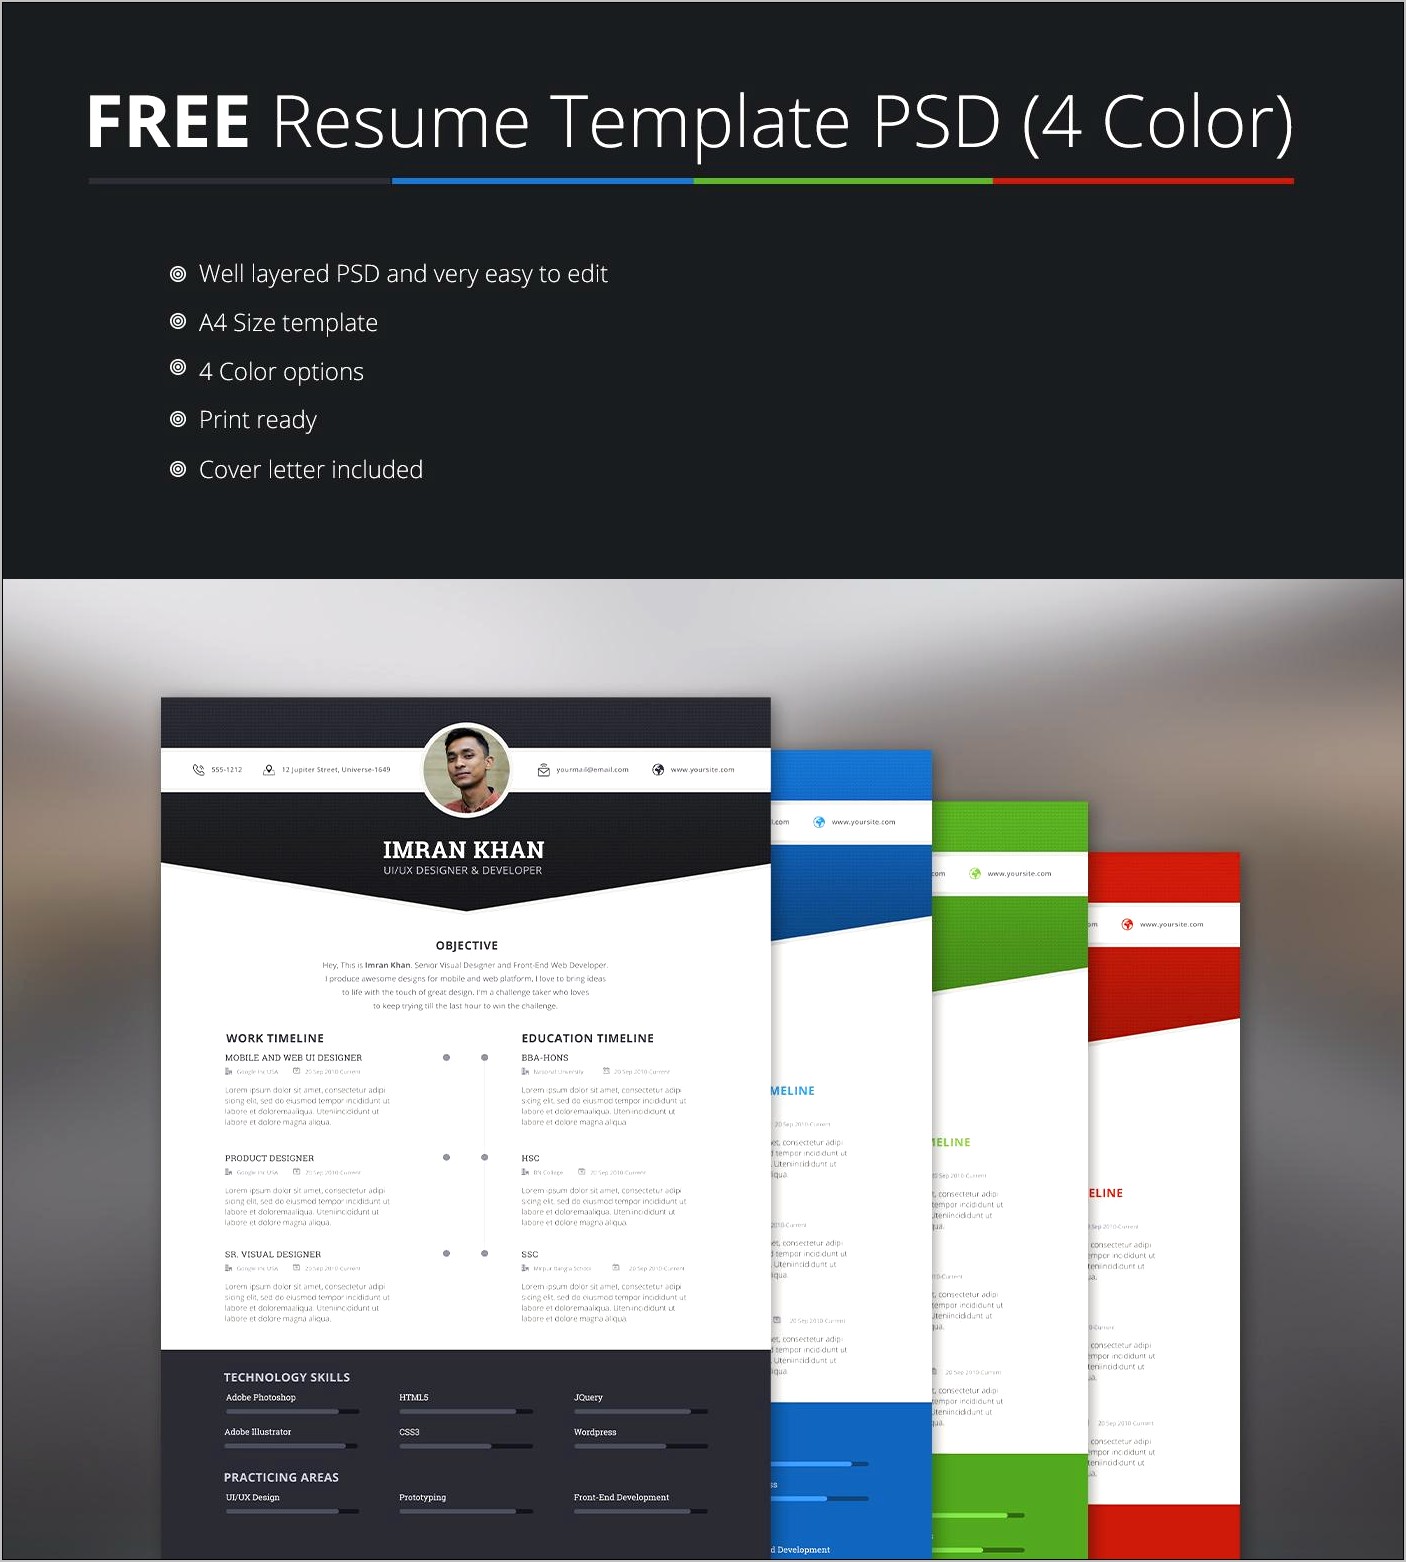 Free Resume Template Psd Download